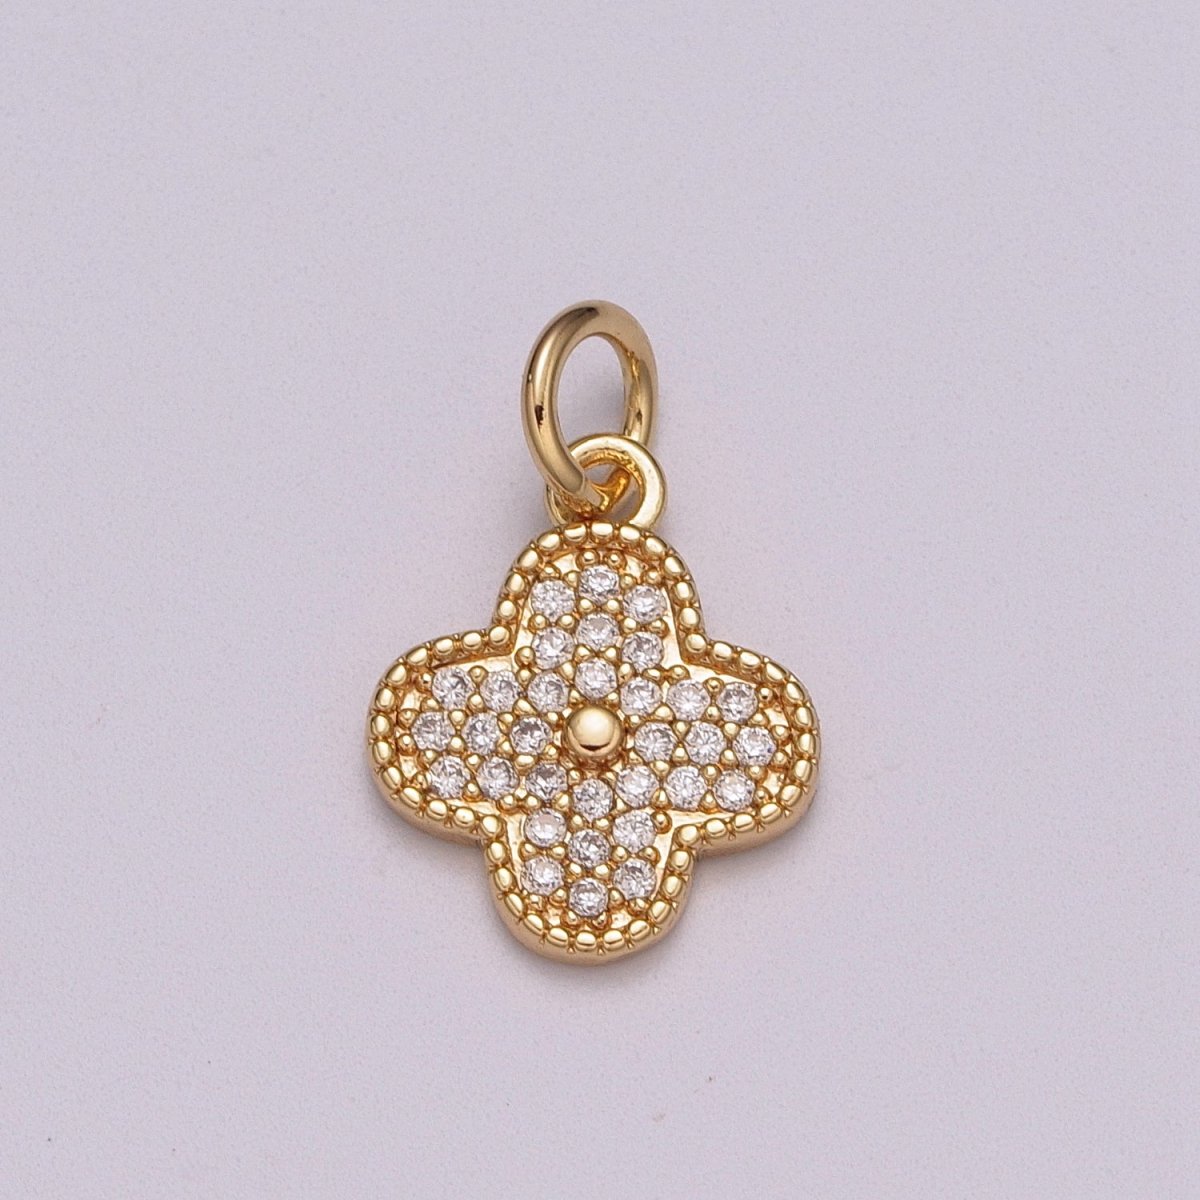 Dainty Clover Pendant Lucky Jewelry Component Add on Charm Micro Pave Shamrock Charm for Necklace Earring Bracelet Supply M-770 - DLUXCA